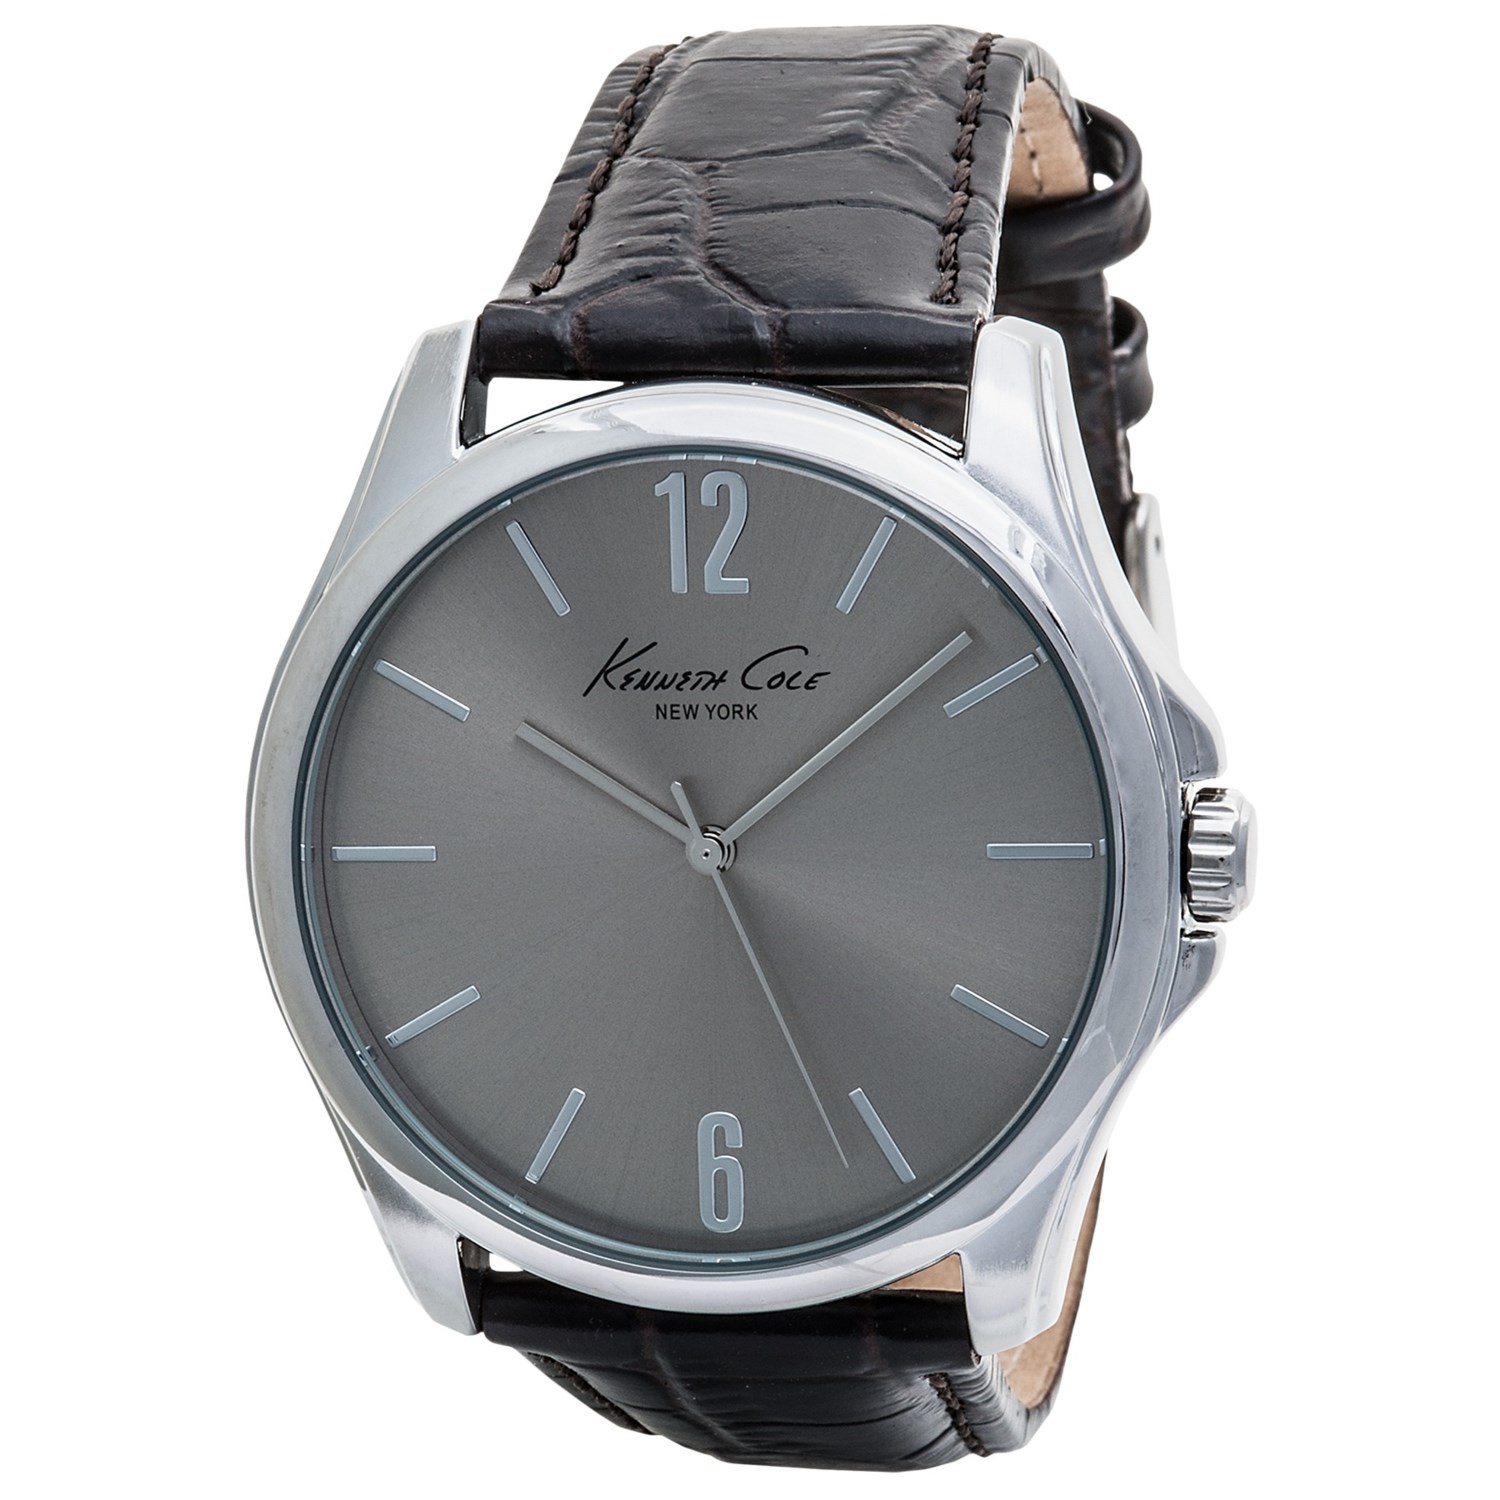 ... Cole Classic Dress Watch - Croc-Embossed Strap (For Men) in Grey/Brown